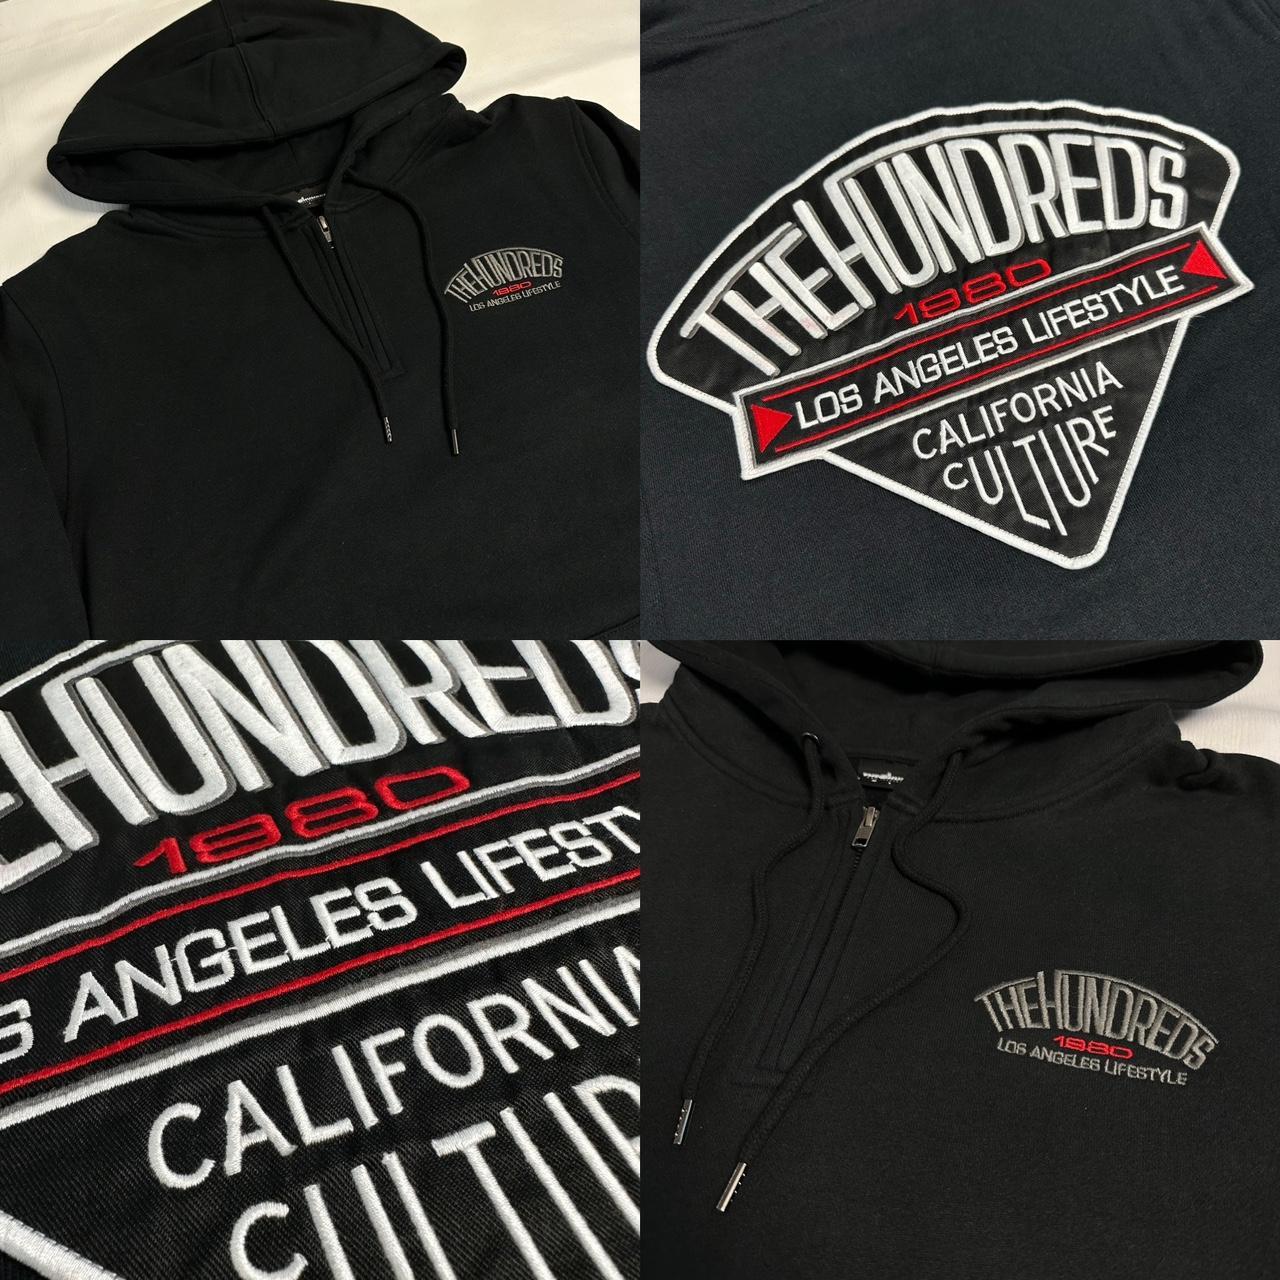 The Hundreds Men's Black and Red Sweatshirt (4)